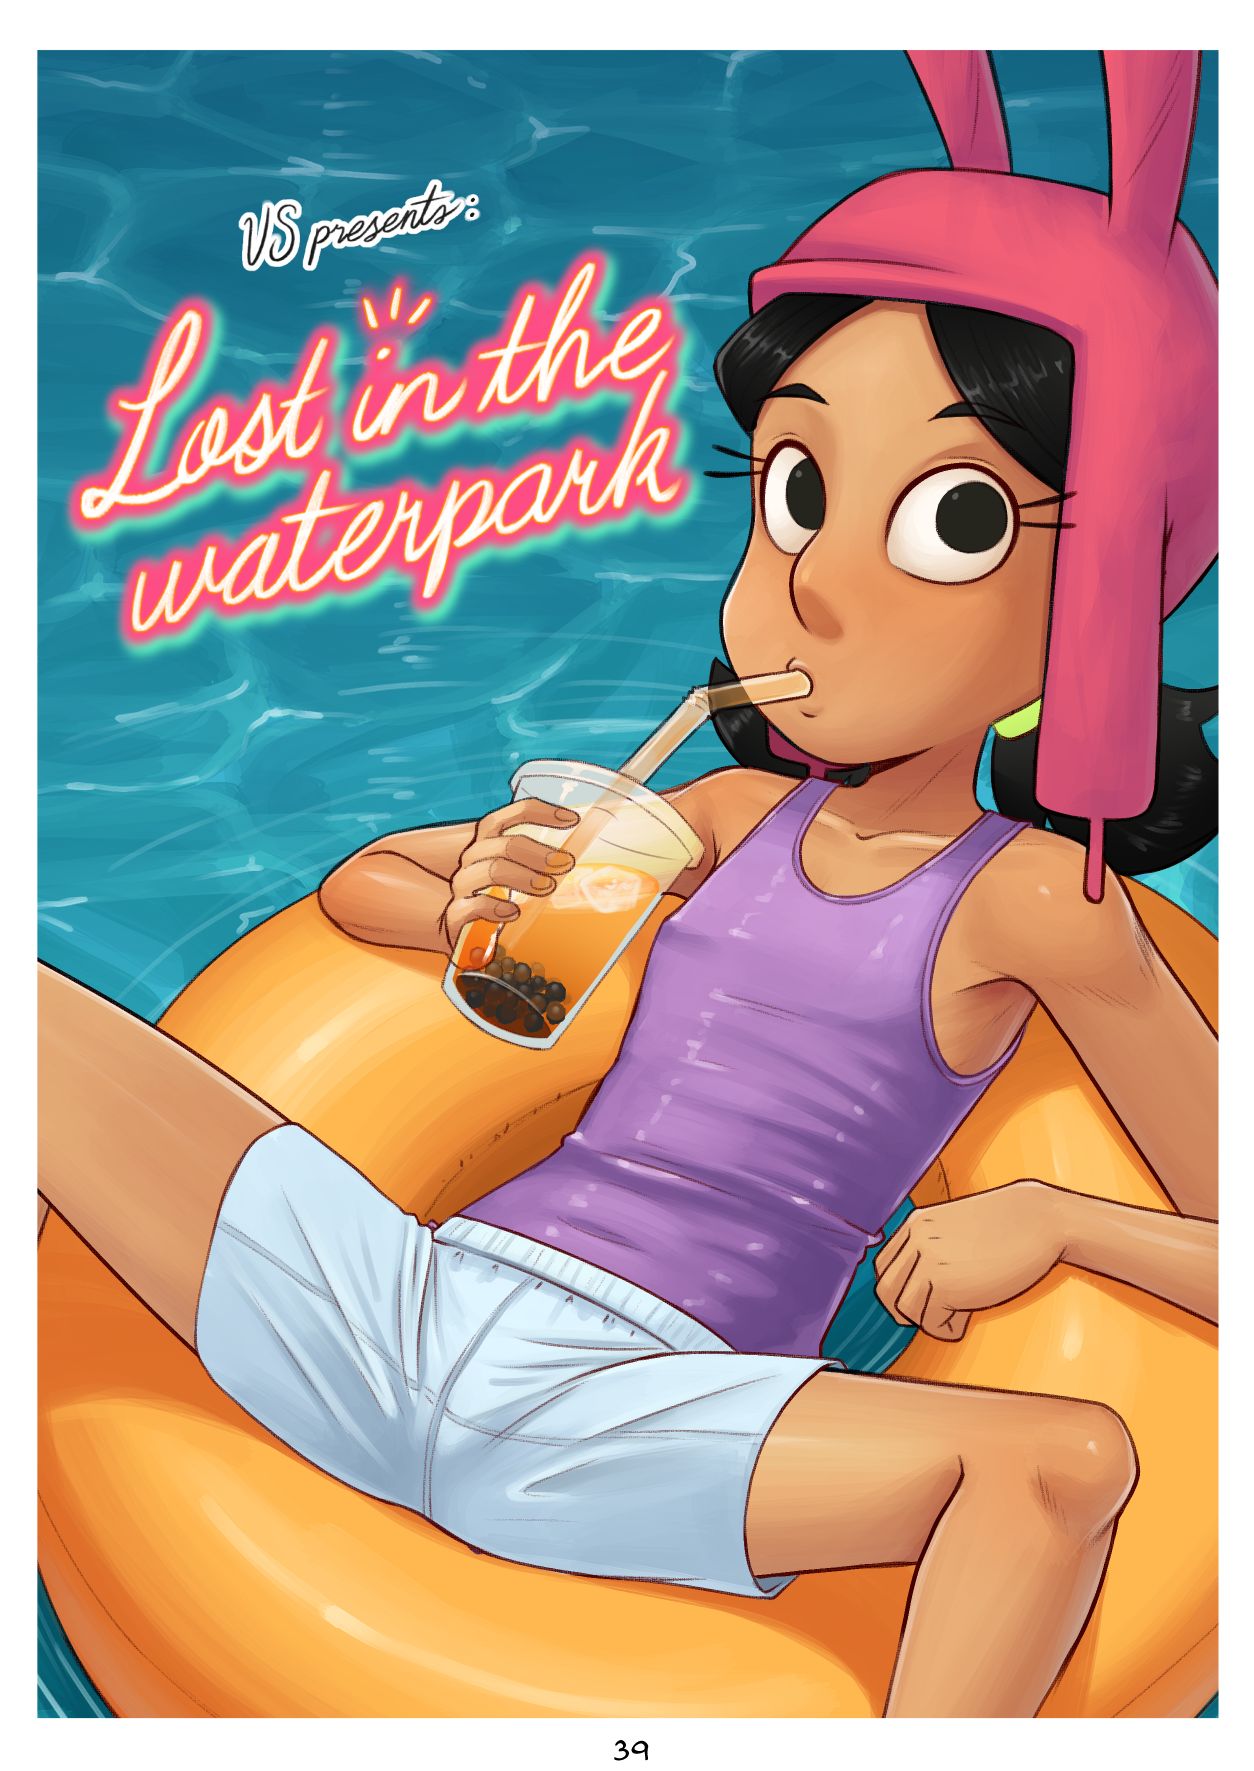 Bobs Burgers - Lost in the Waterpark - Page 1 - HentaiRox.